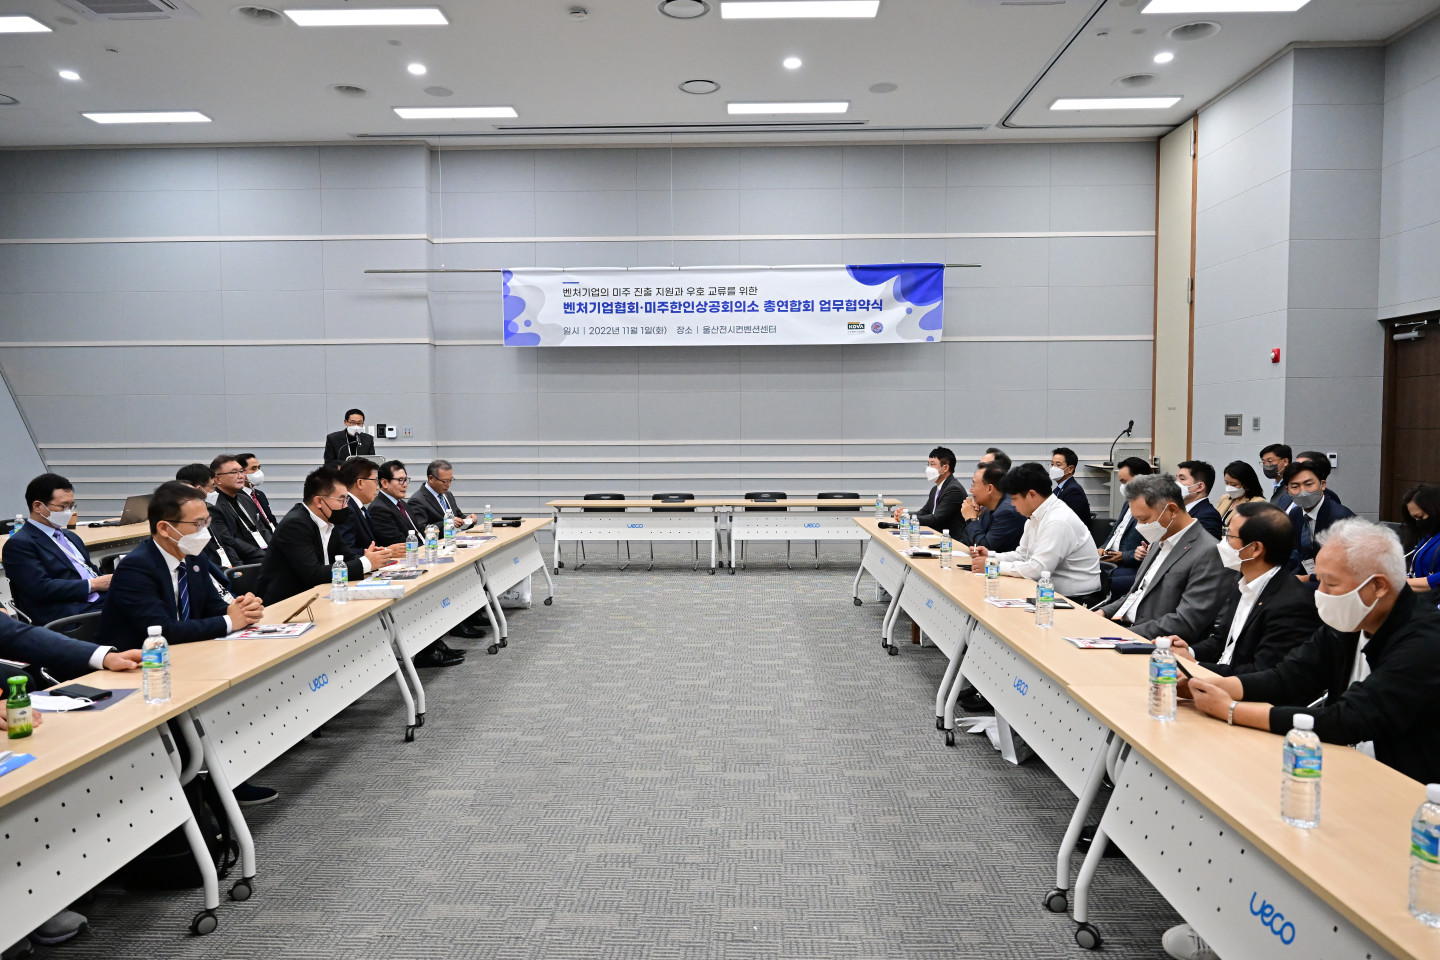 Business agreement ceremony between the Korean American Chamber of Commerce and the Korea Venture Business Association